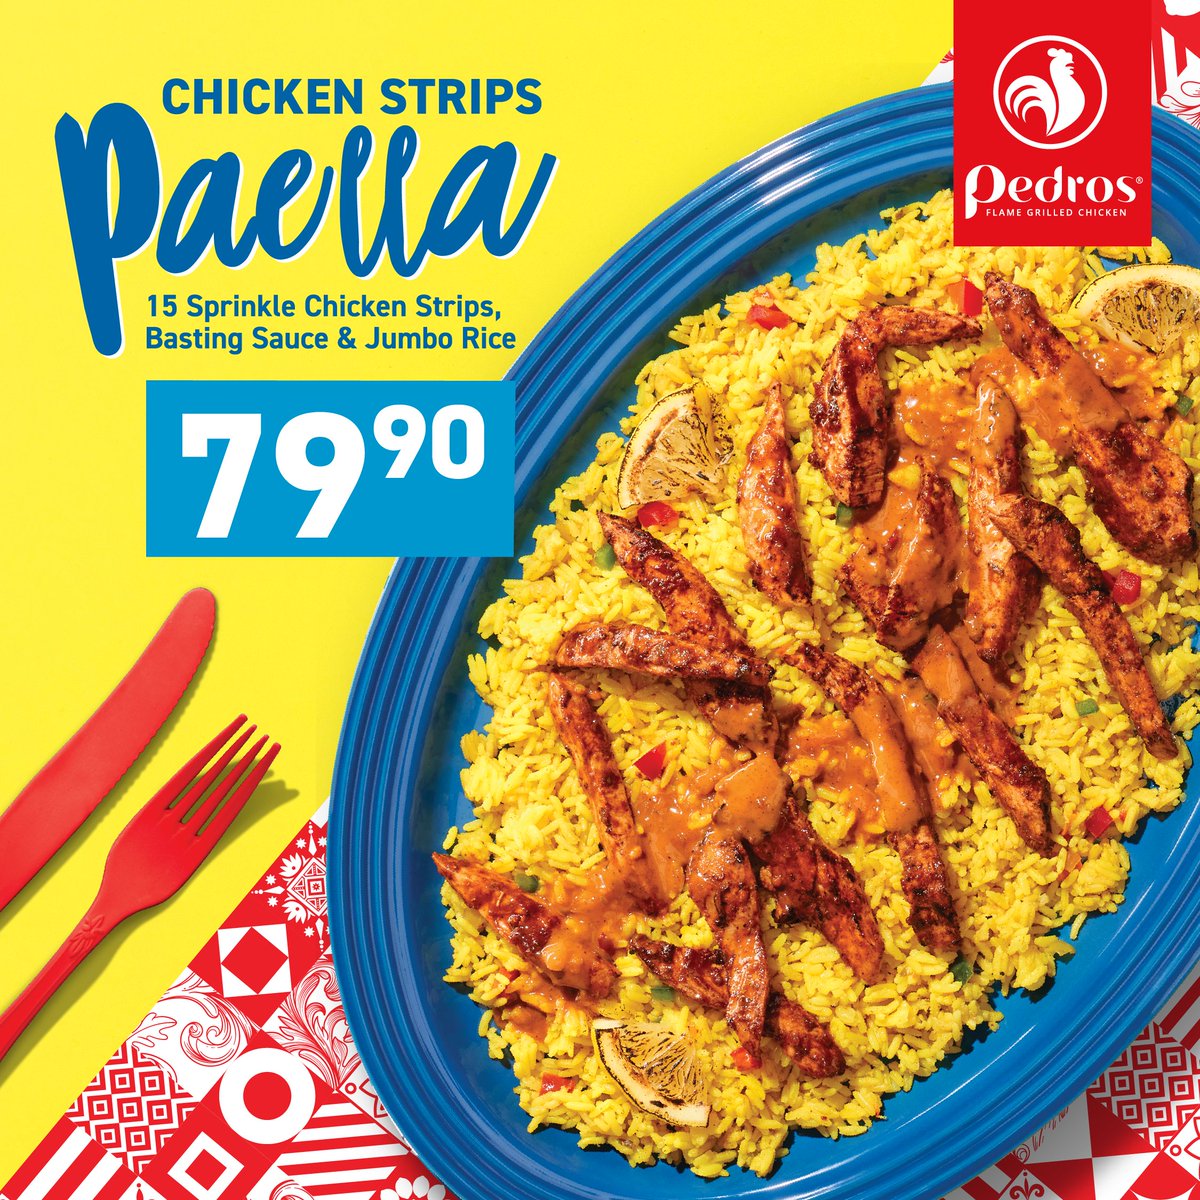 Olá! CONGRATS to our #FanoftheWeek: @Buccaneer_03 You've WON Chicken Strips Paella! Kindly check your DMs! #VivaPedros #YouMeanPedros